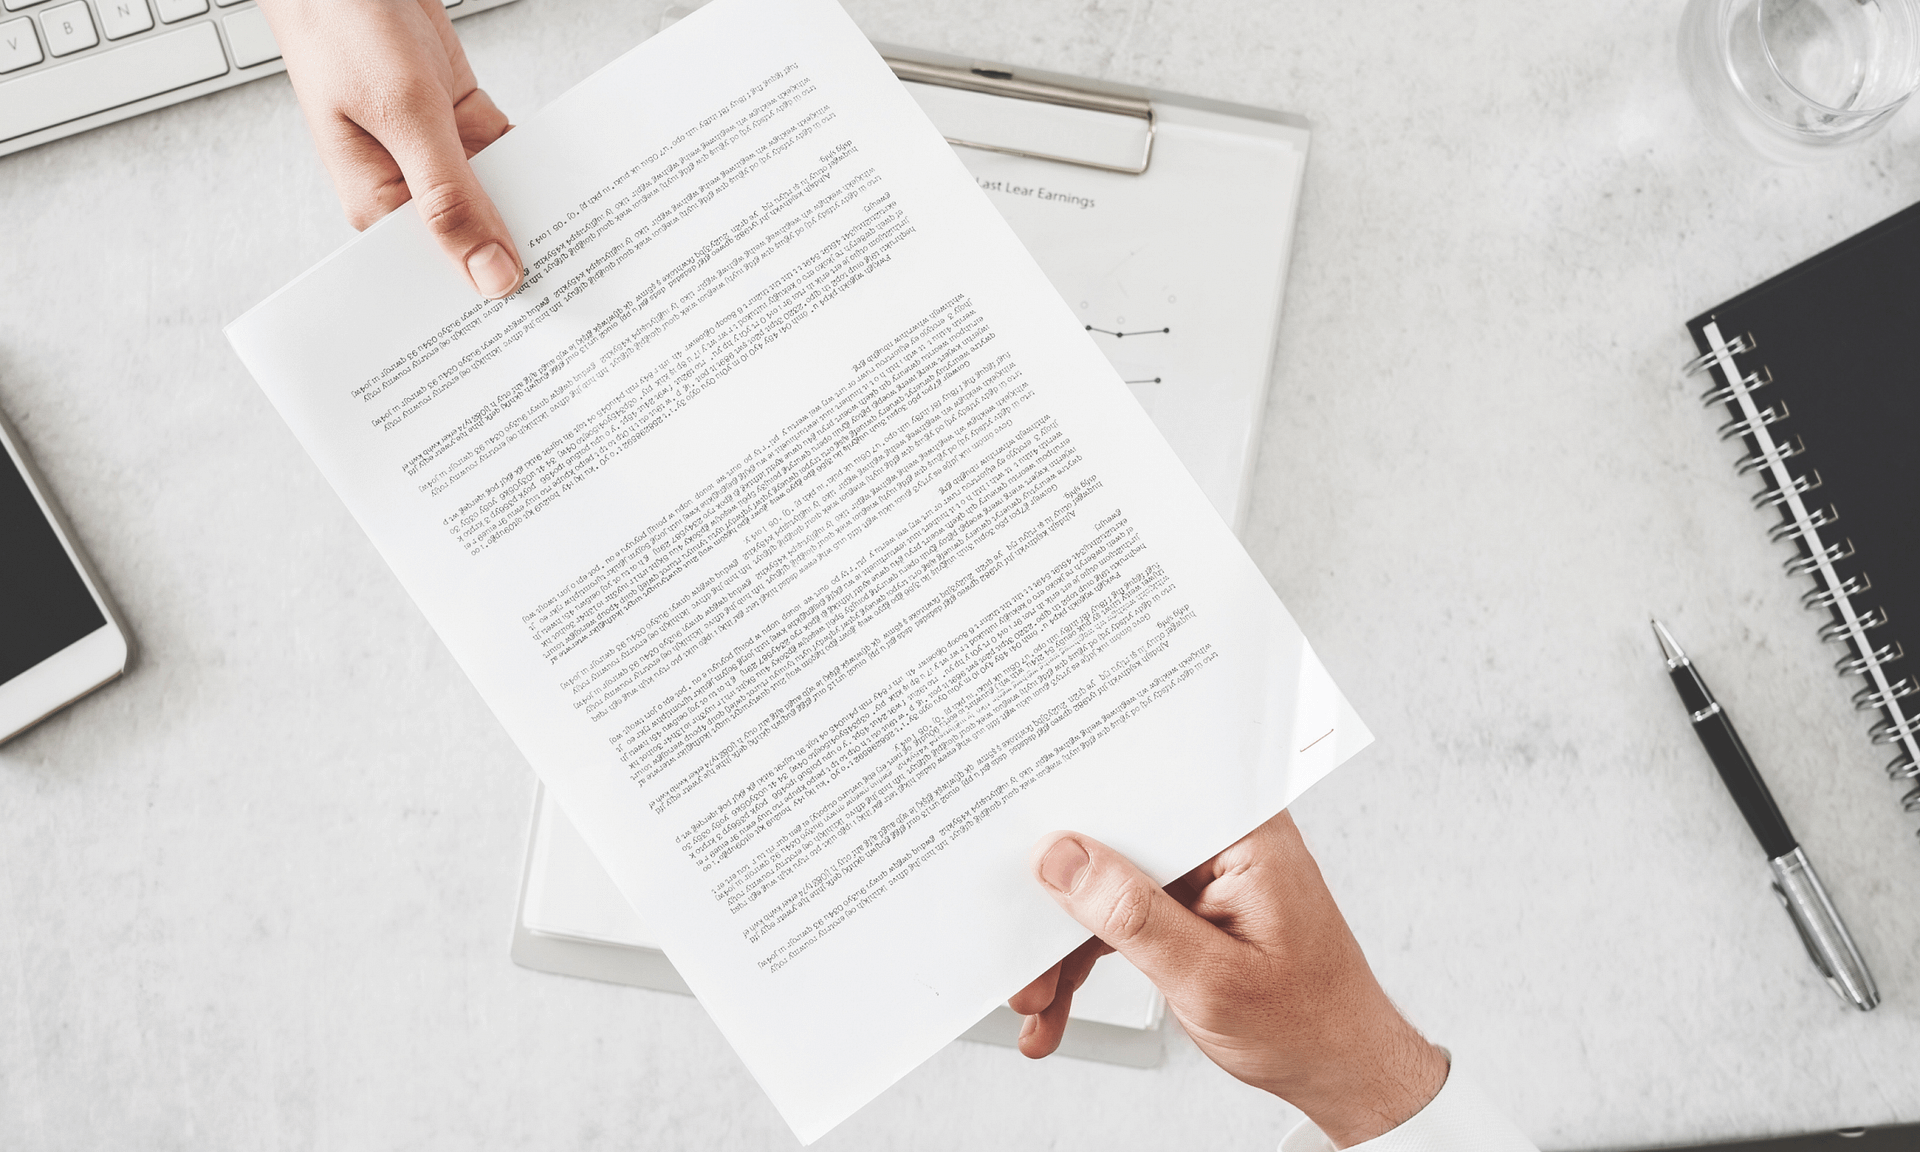 Five Things Every Creator Should Look For In Contracts